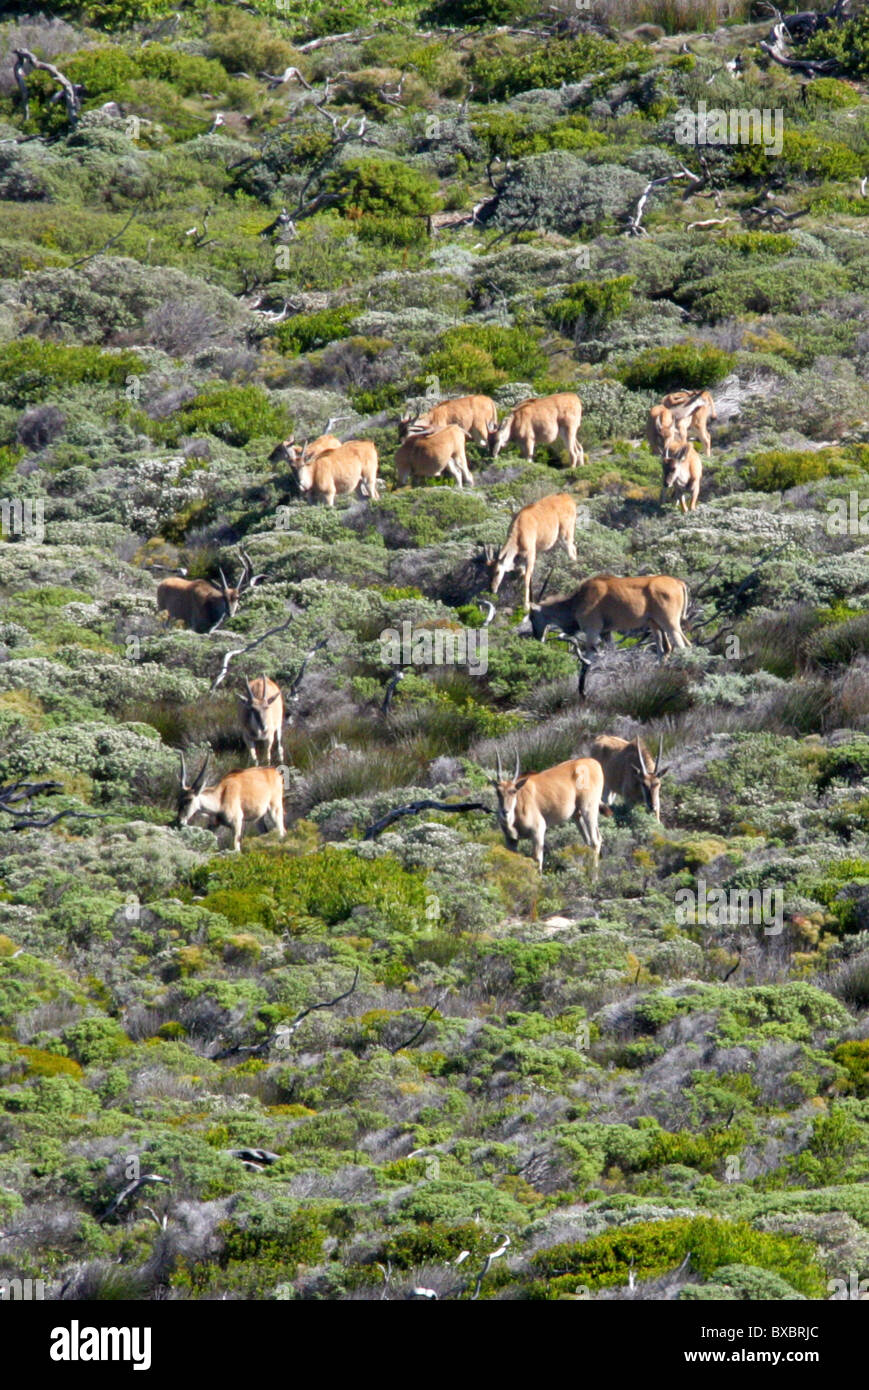 A Large Herd of Fifteen Common or Southern Eland, Taurotragus oryx, at Cape Point, Cape Peninsular, South Africa. Stock Photo